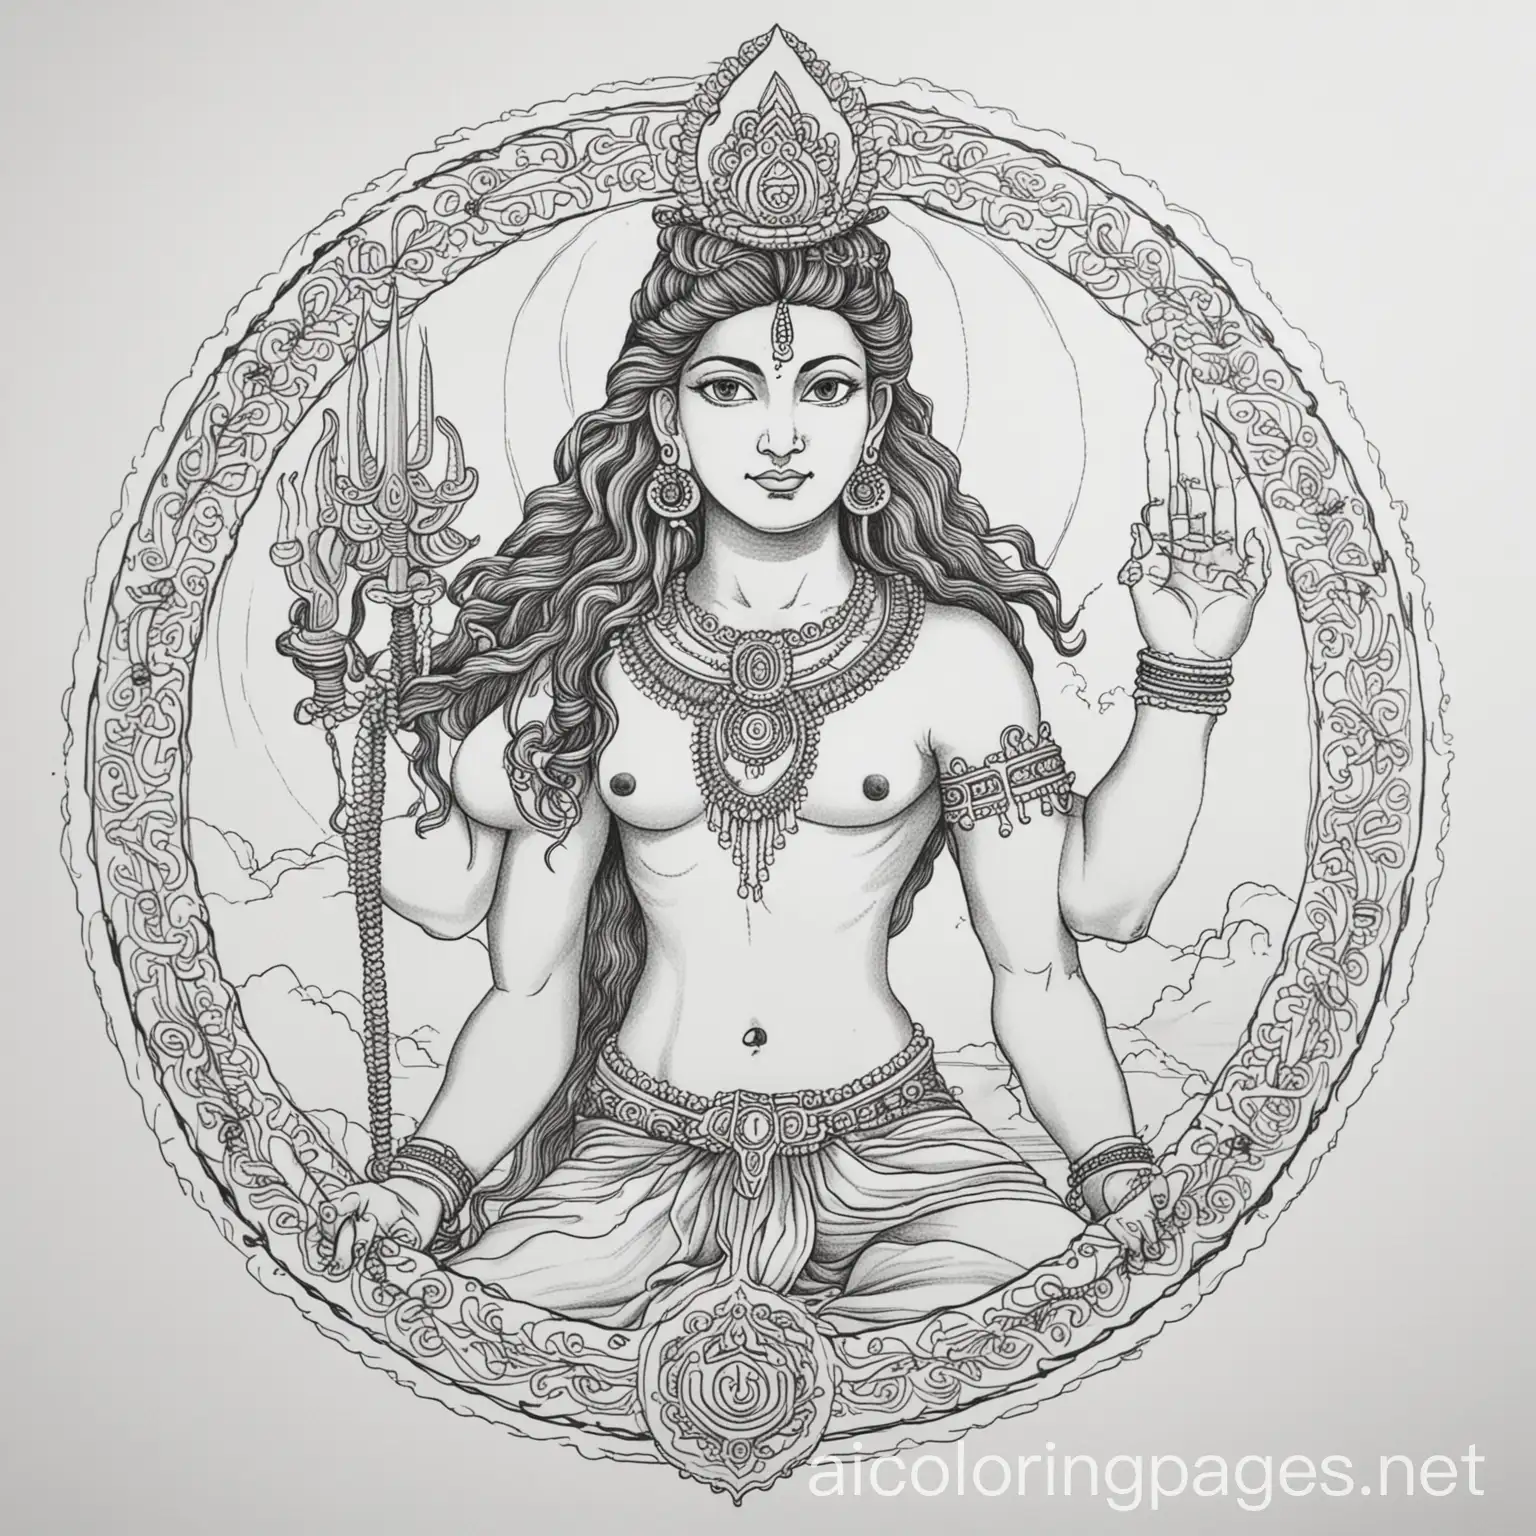 Shiva shakti temple in the Caribbean, Coloring Page, black and white, line art, white background, Simplicity, Ample White Space. The background of the coloring page is plain white to make it easy for young children to color within the lines. The outlines of all the subjects are easy to distinguish, making it simple for kids to color without too much difficulty